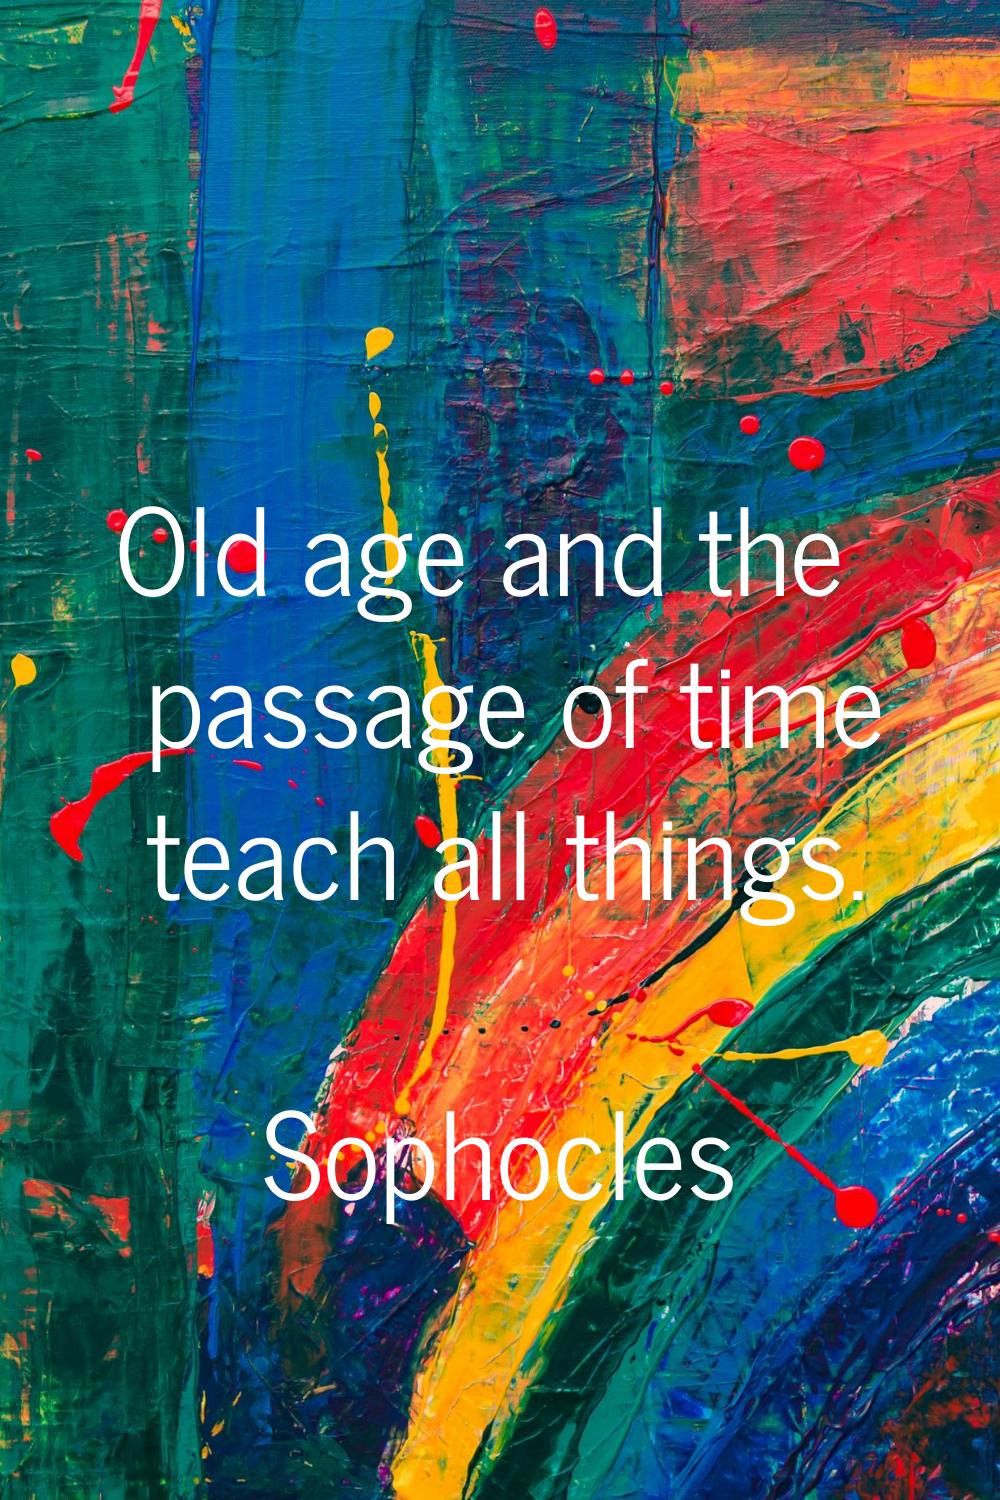 Old age and the passage of time teach all things.